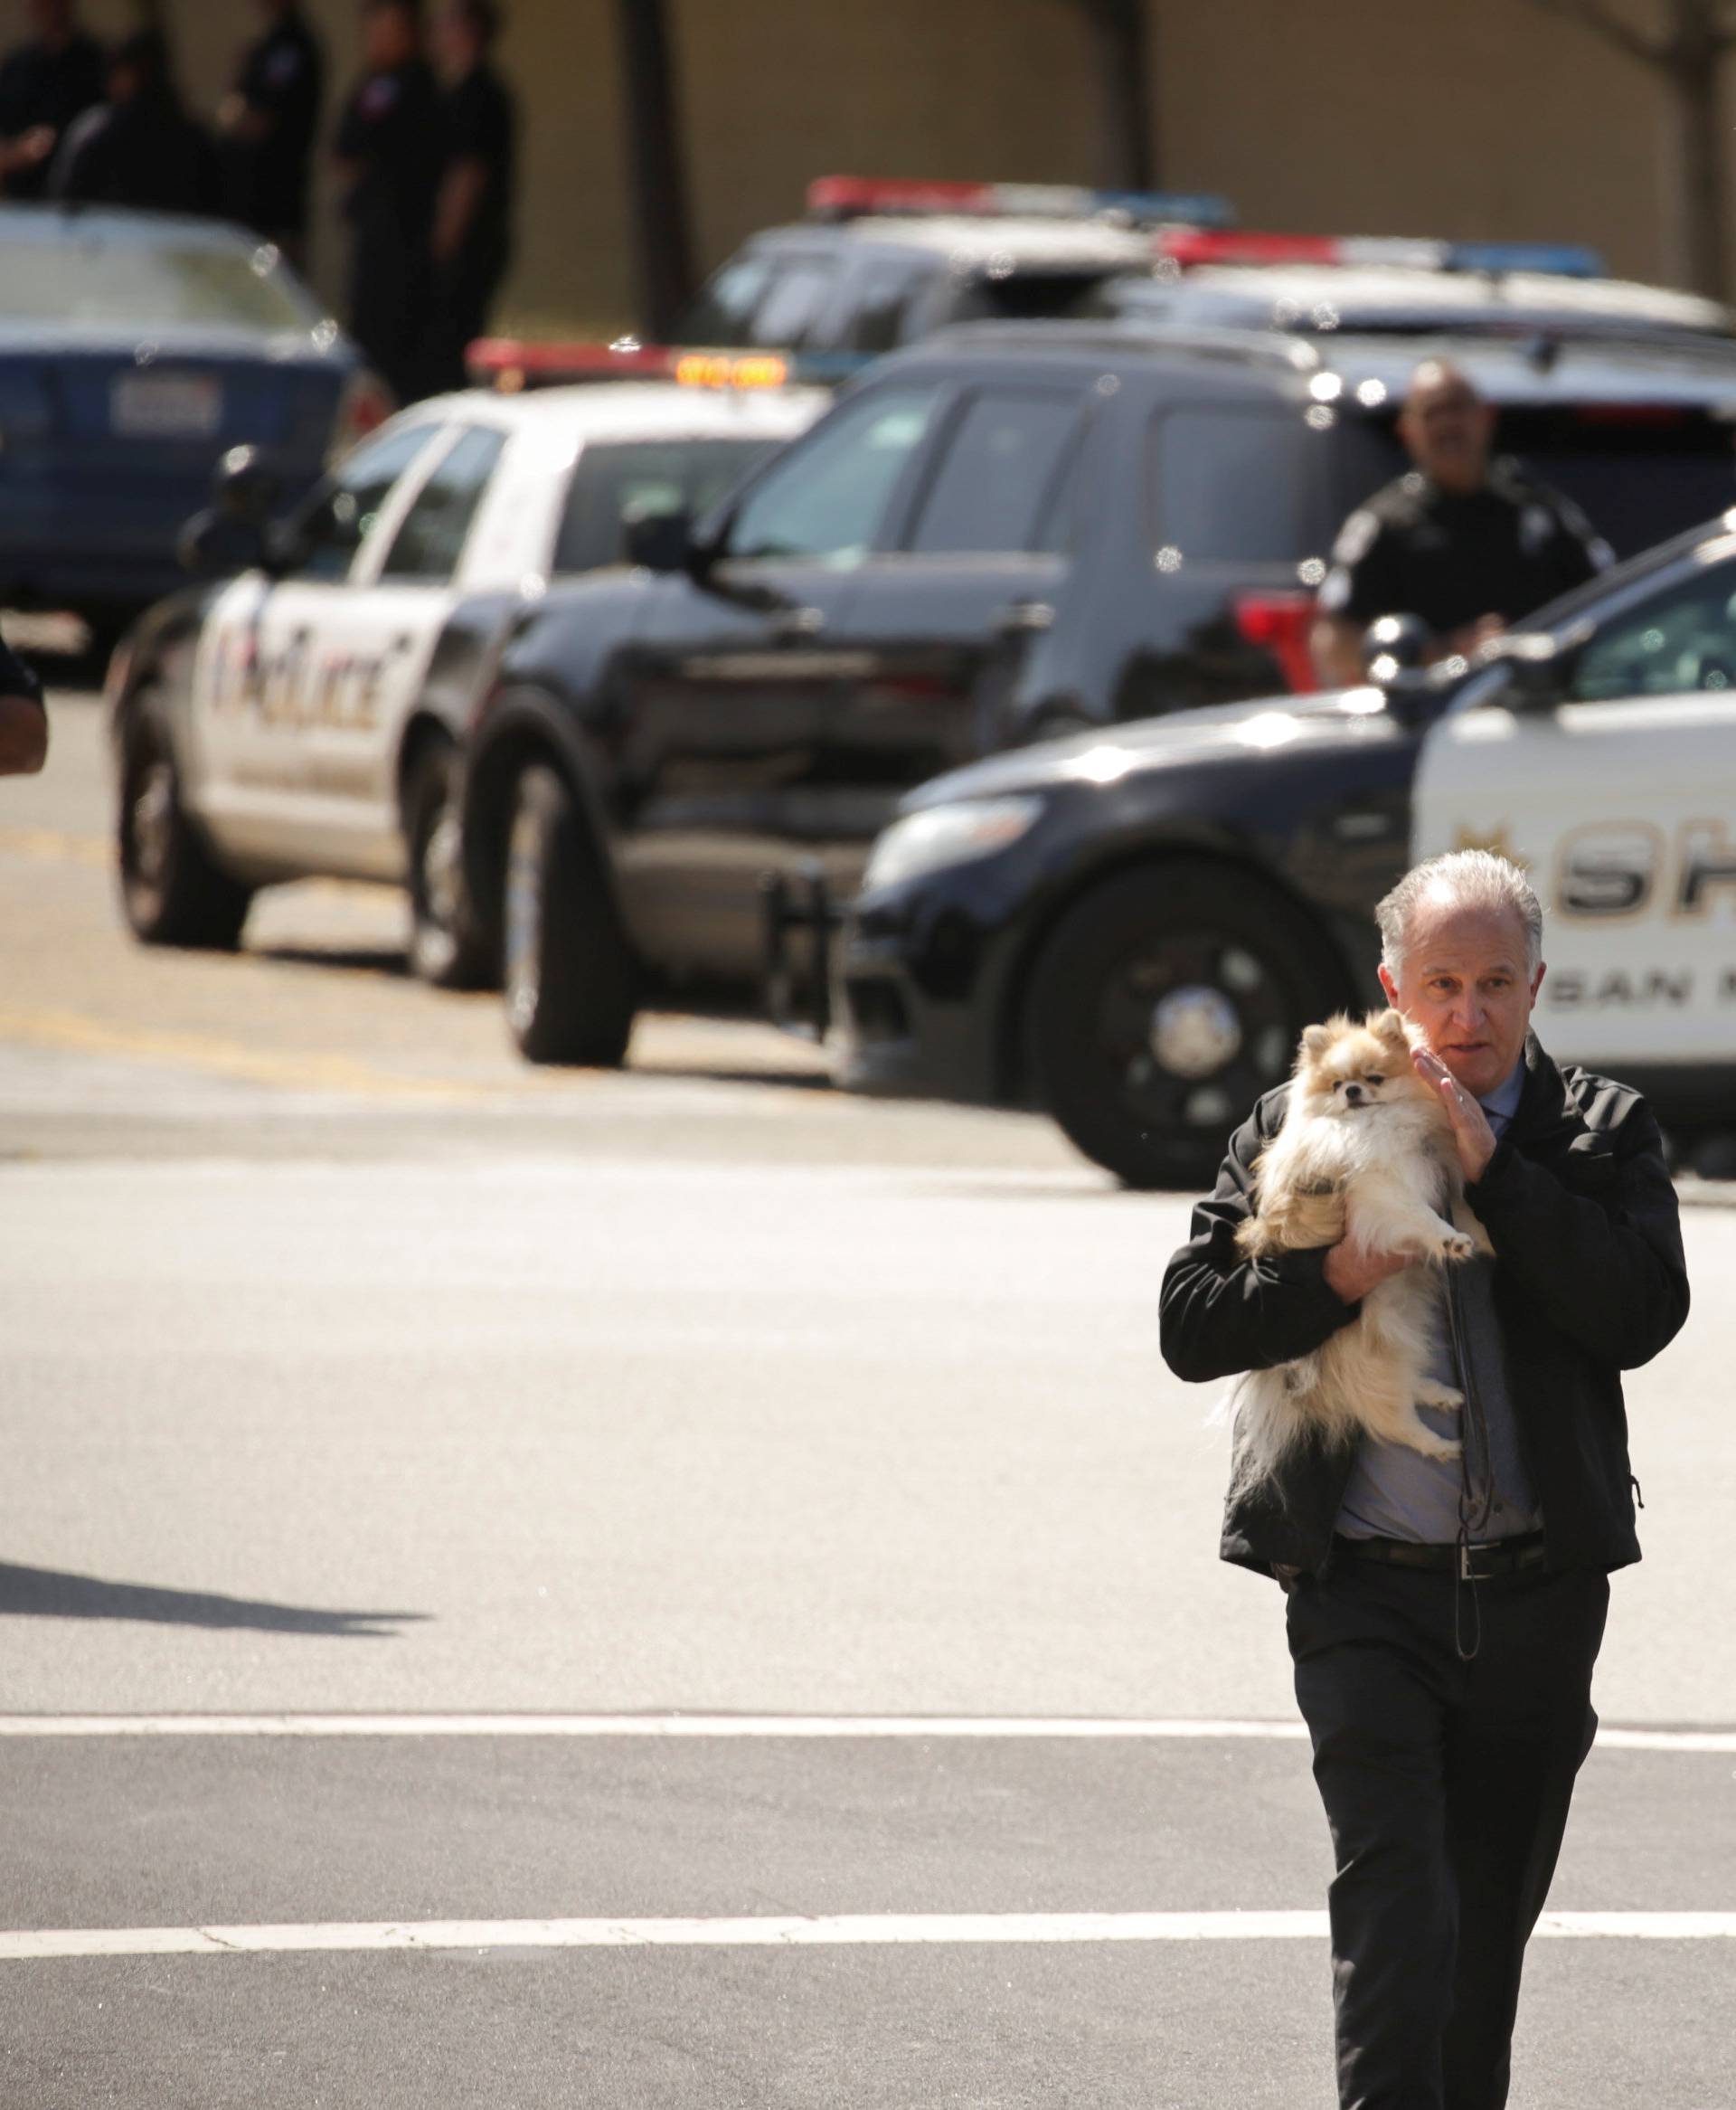 Burlingame police chief Eric Wollman pets Kimba while bringing him to his owner following an active shooter situation at Youtube headquarters in San Bruno, California